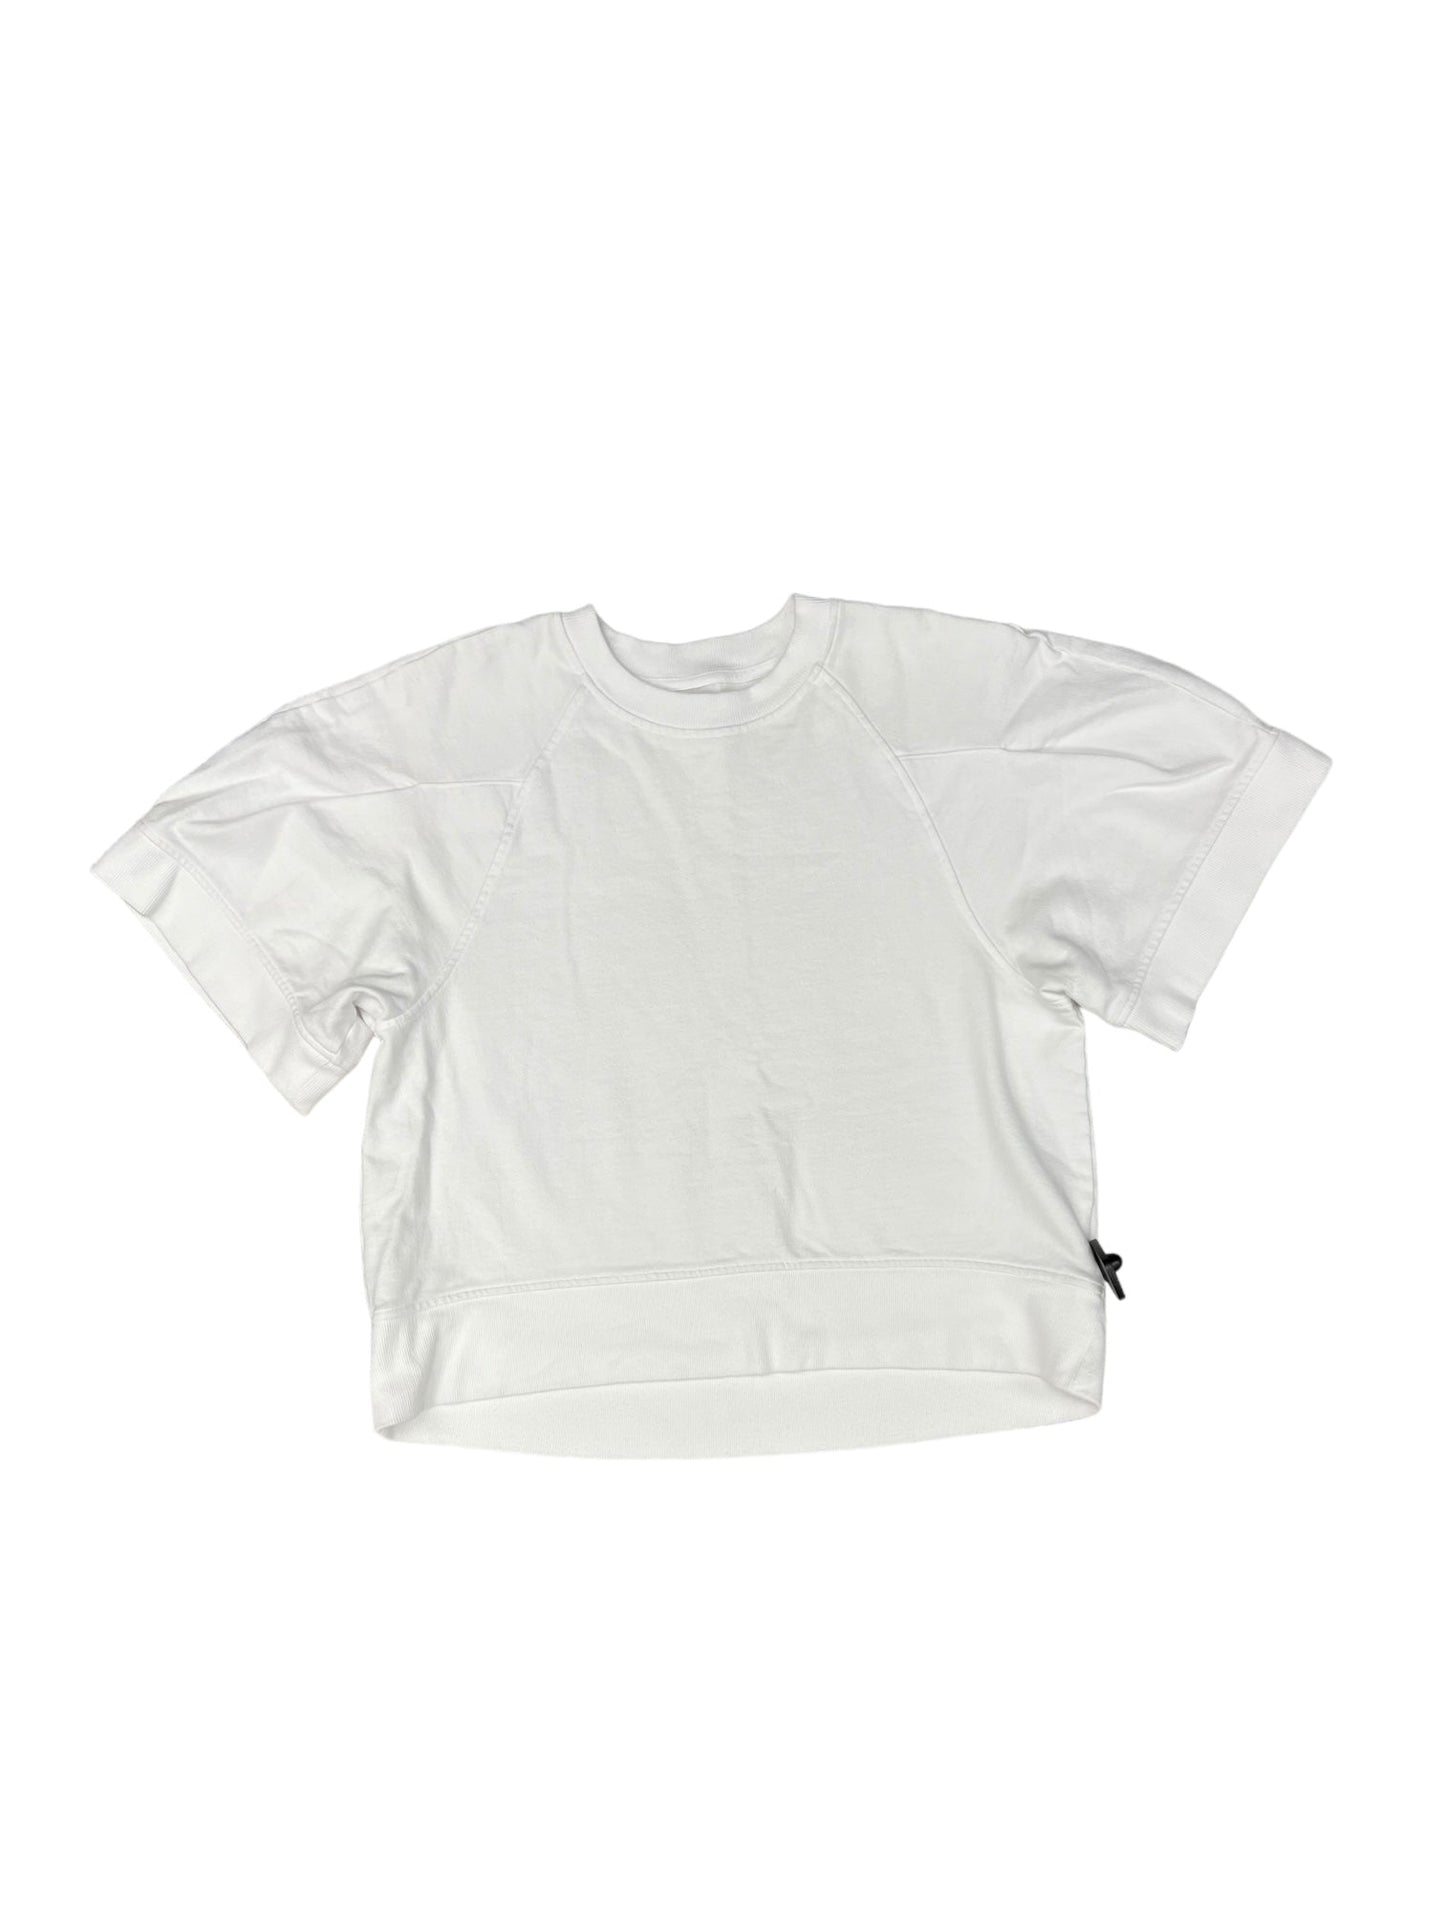 White Athletic Top Short Sleeve Calia, Size L